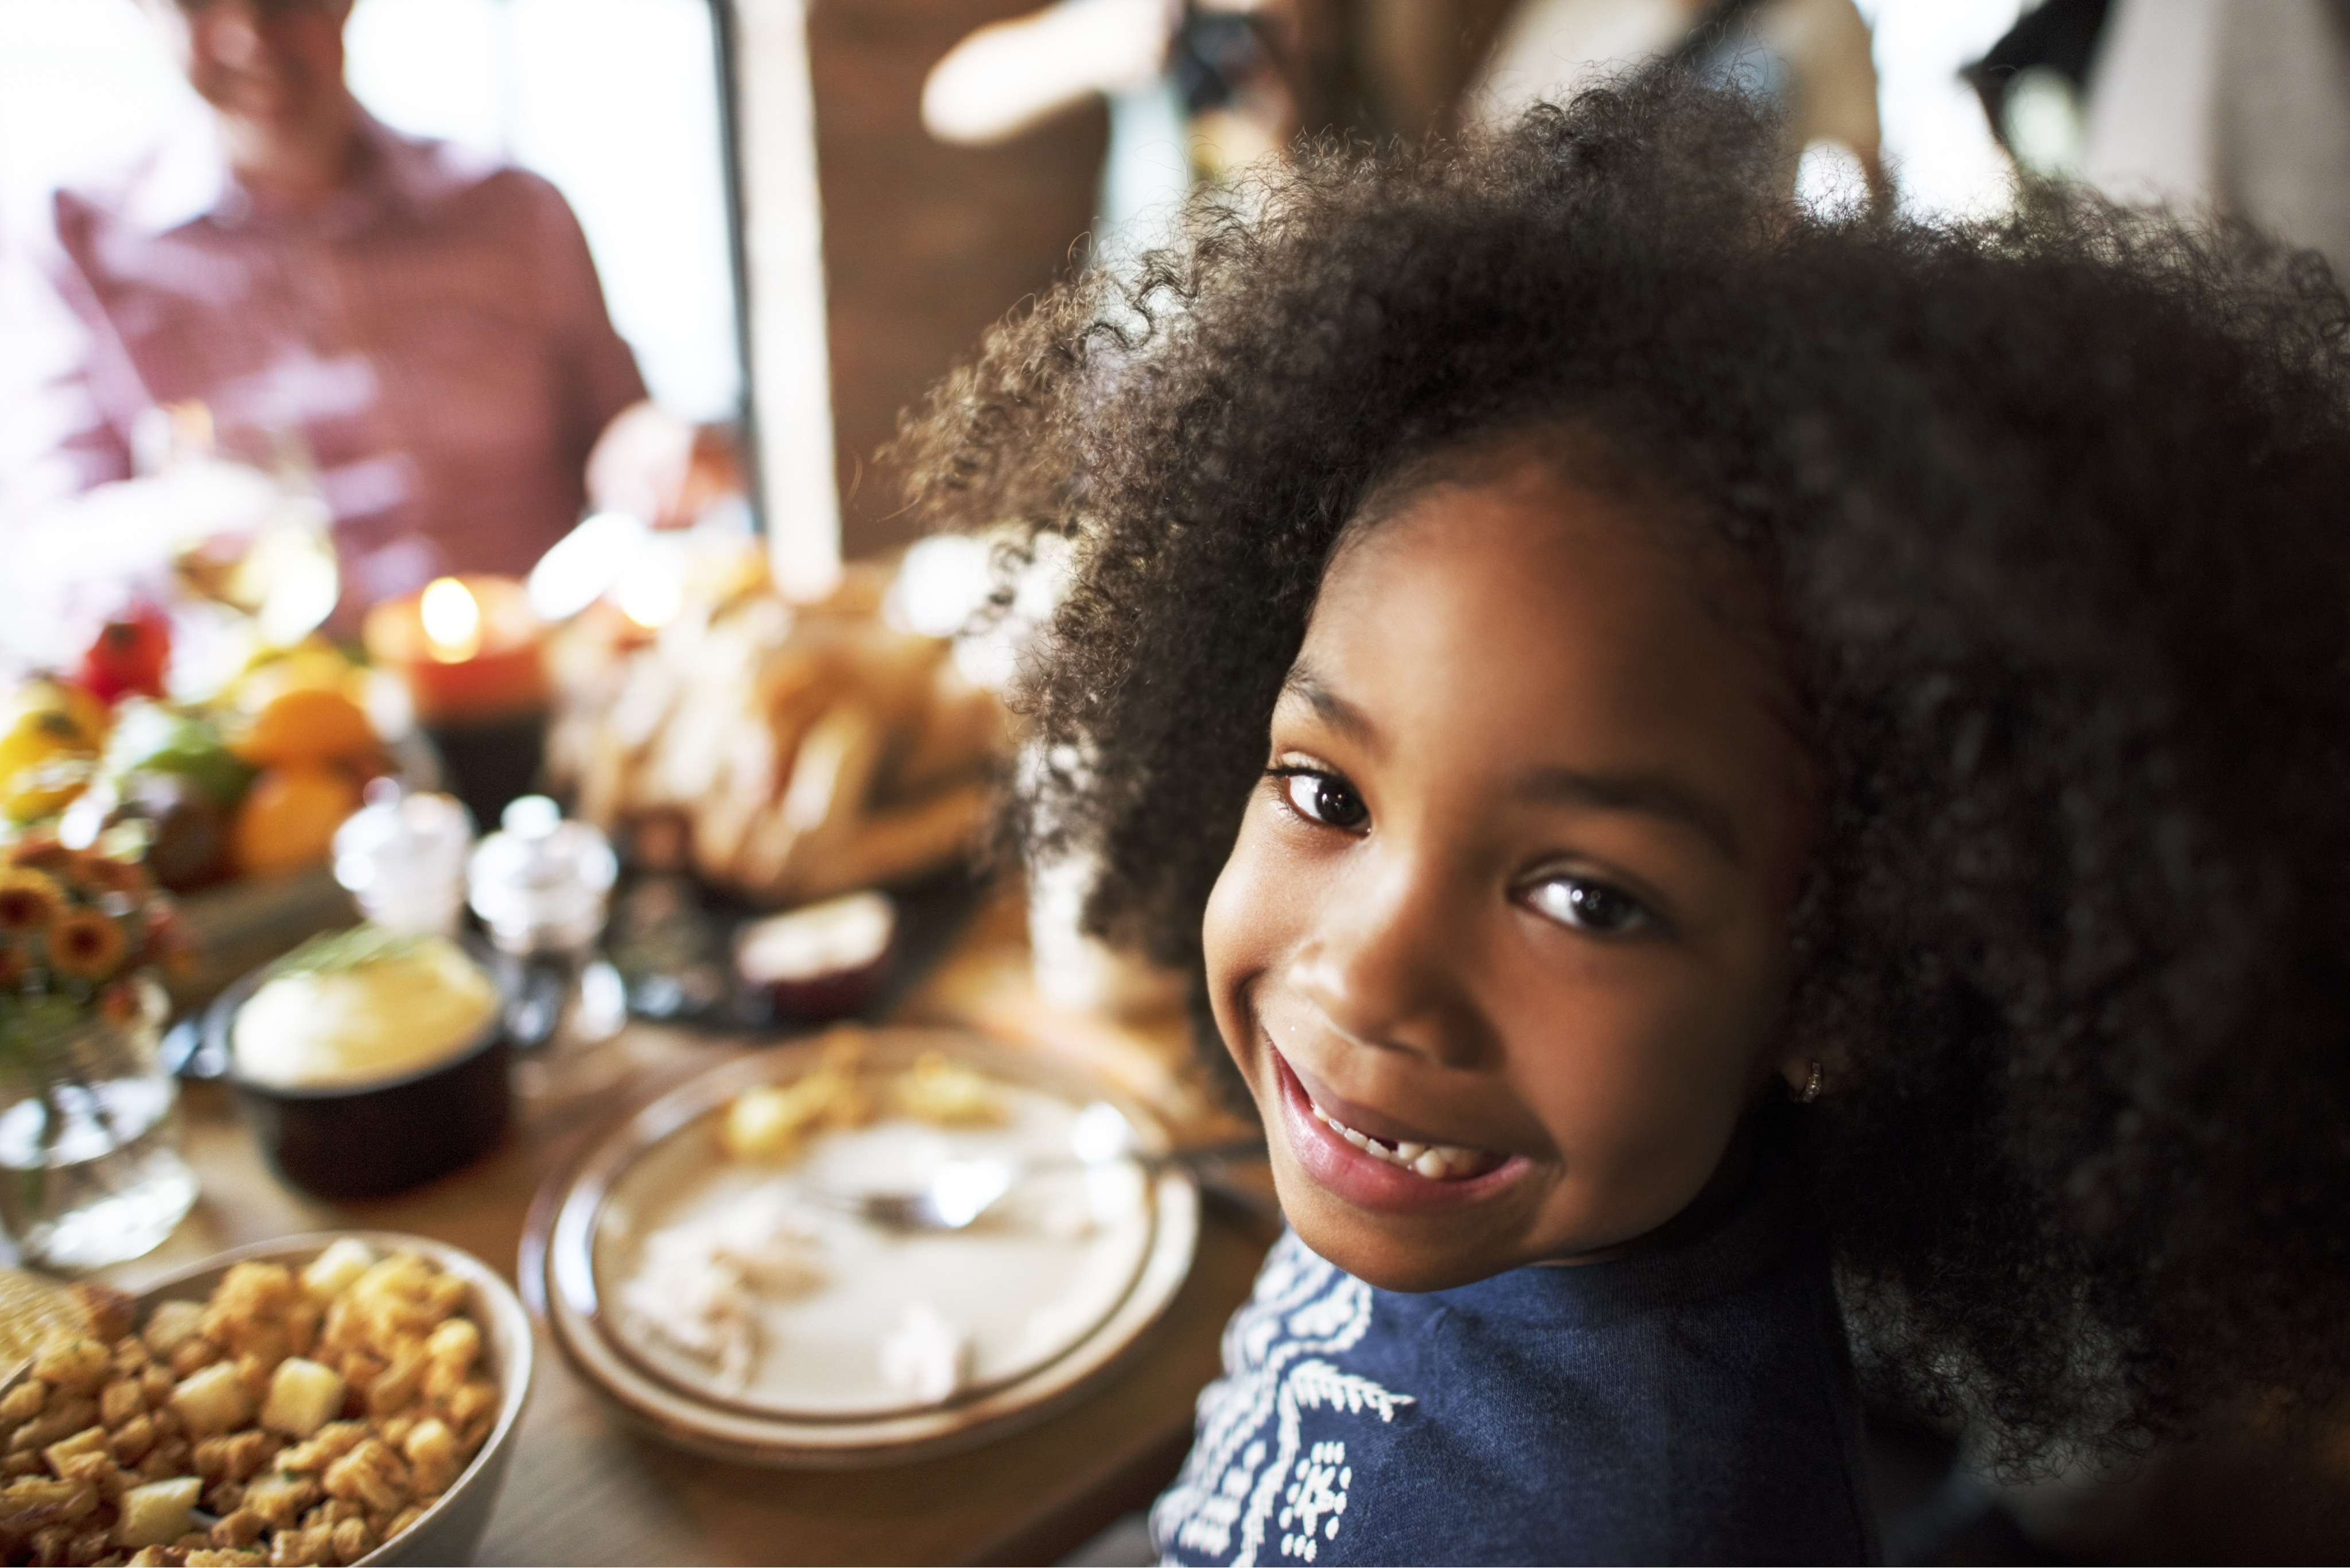 
How To Help Children with Feeding Difficulties During Holiday Meals 